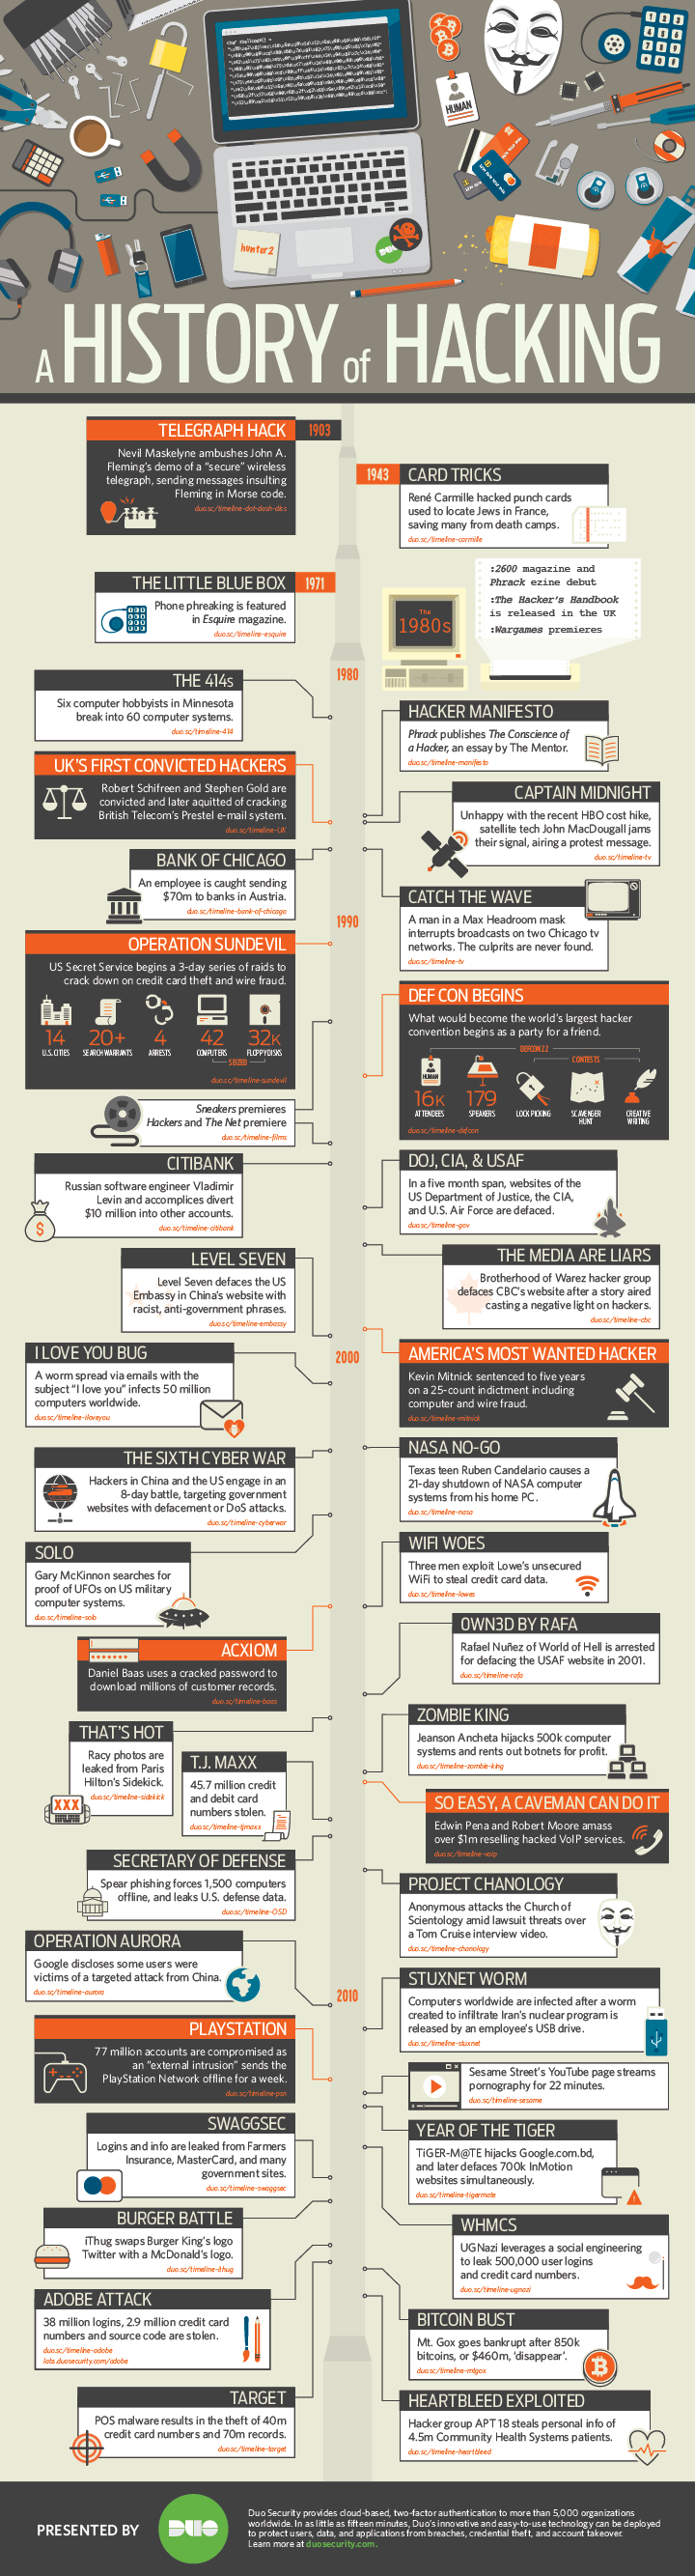 infographic hacking hacker history timeline hunter2 flat design infosec breach cybercrime cybersecurity